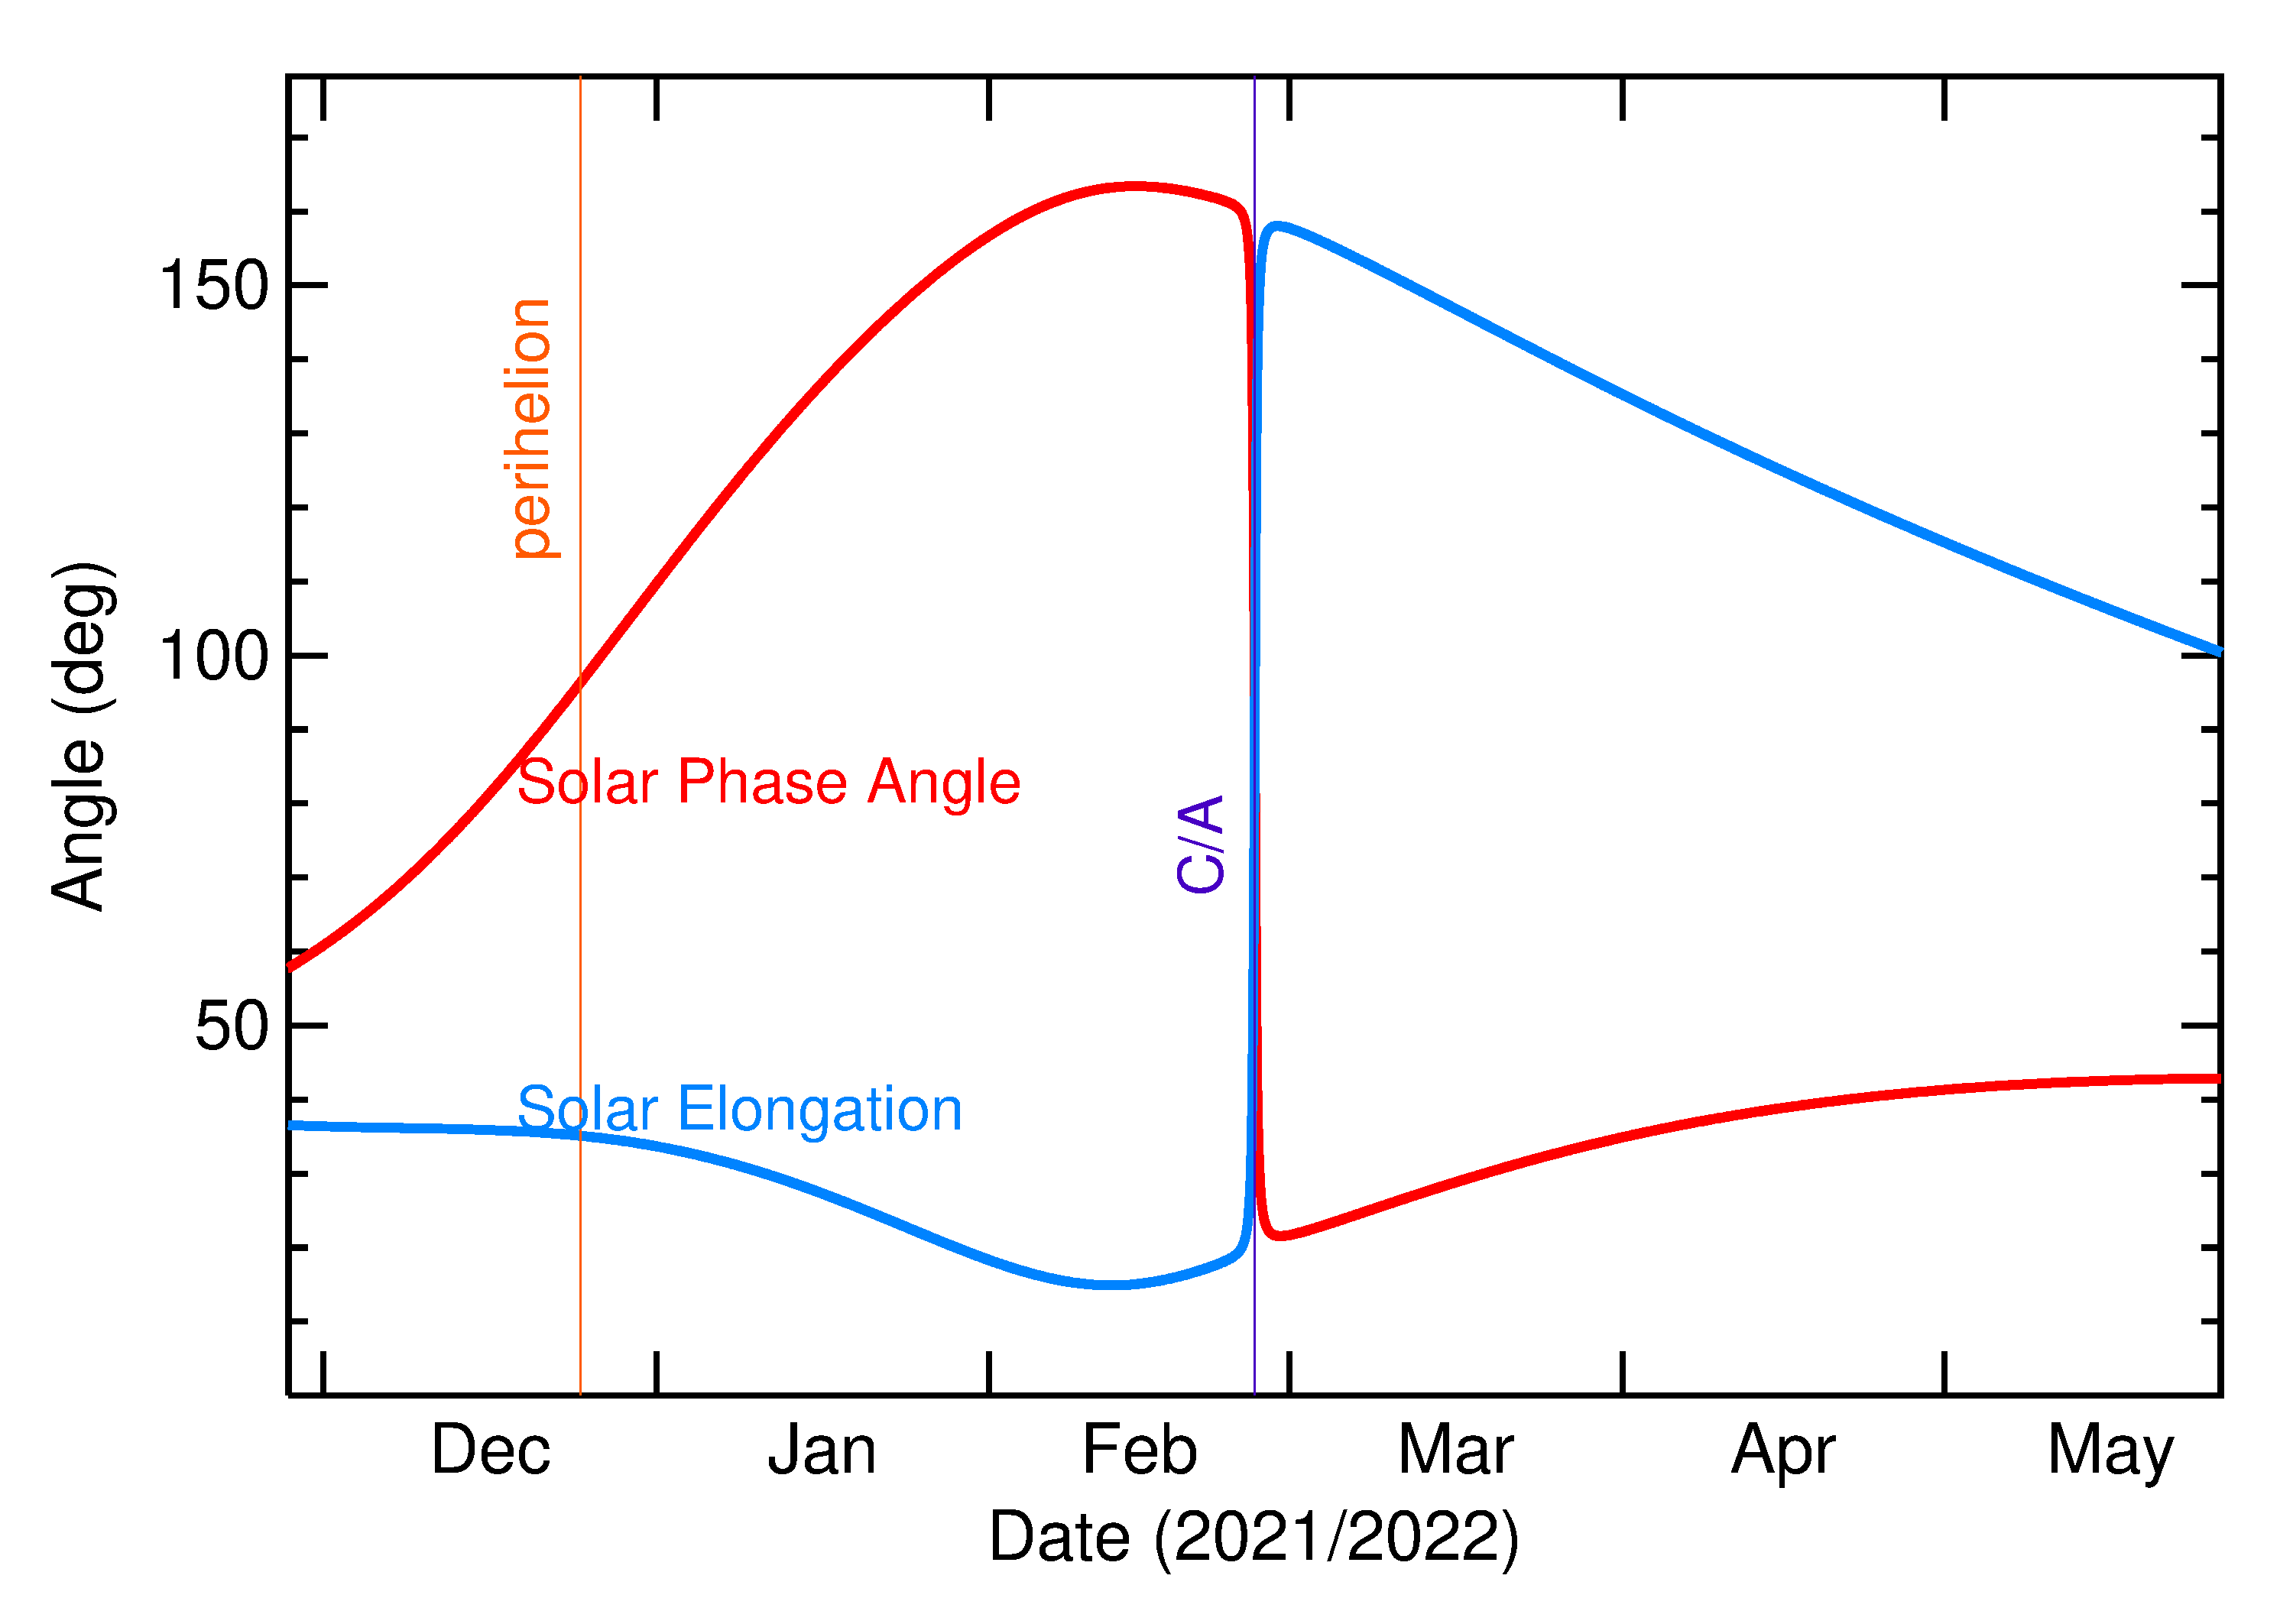 Solar Elongation and Solar Phase Angle of 2022 DY1 in the months around closest approach